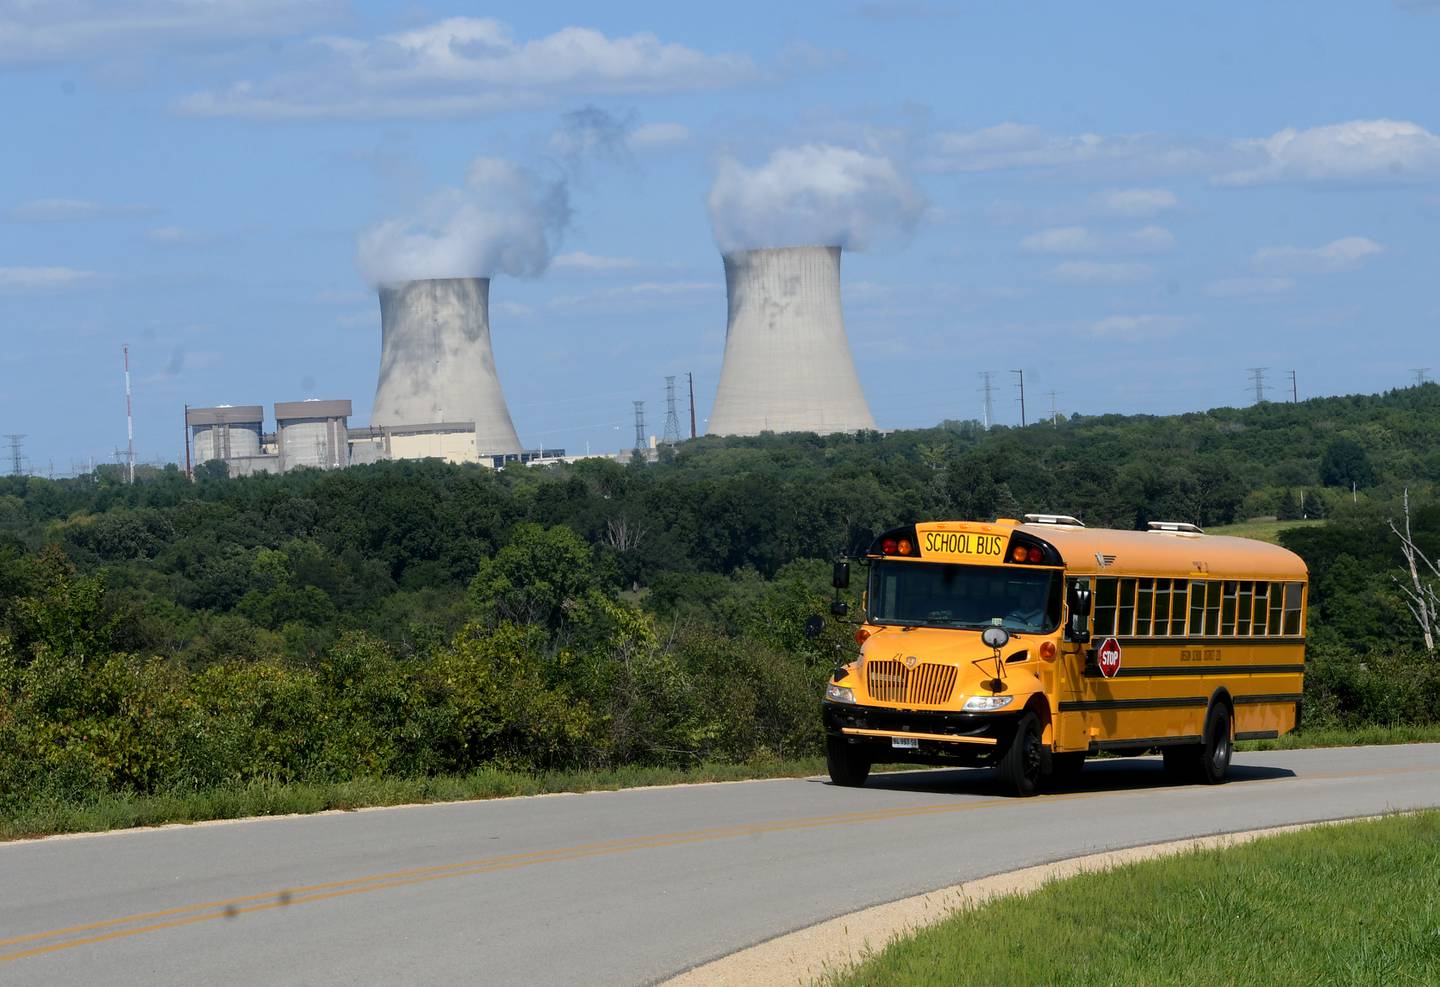 An Oregon school bus rounds a curve on N. Daysville Road with the Byron nuclear power plant in the background. The Byron School District, along with other taxing districts in Ogle County, would see a sharp decrease in revenues from their tax base if the plant were to be shuttered and its assessment value decreased.